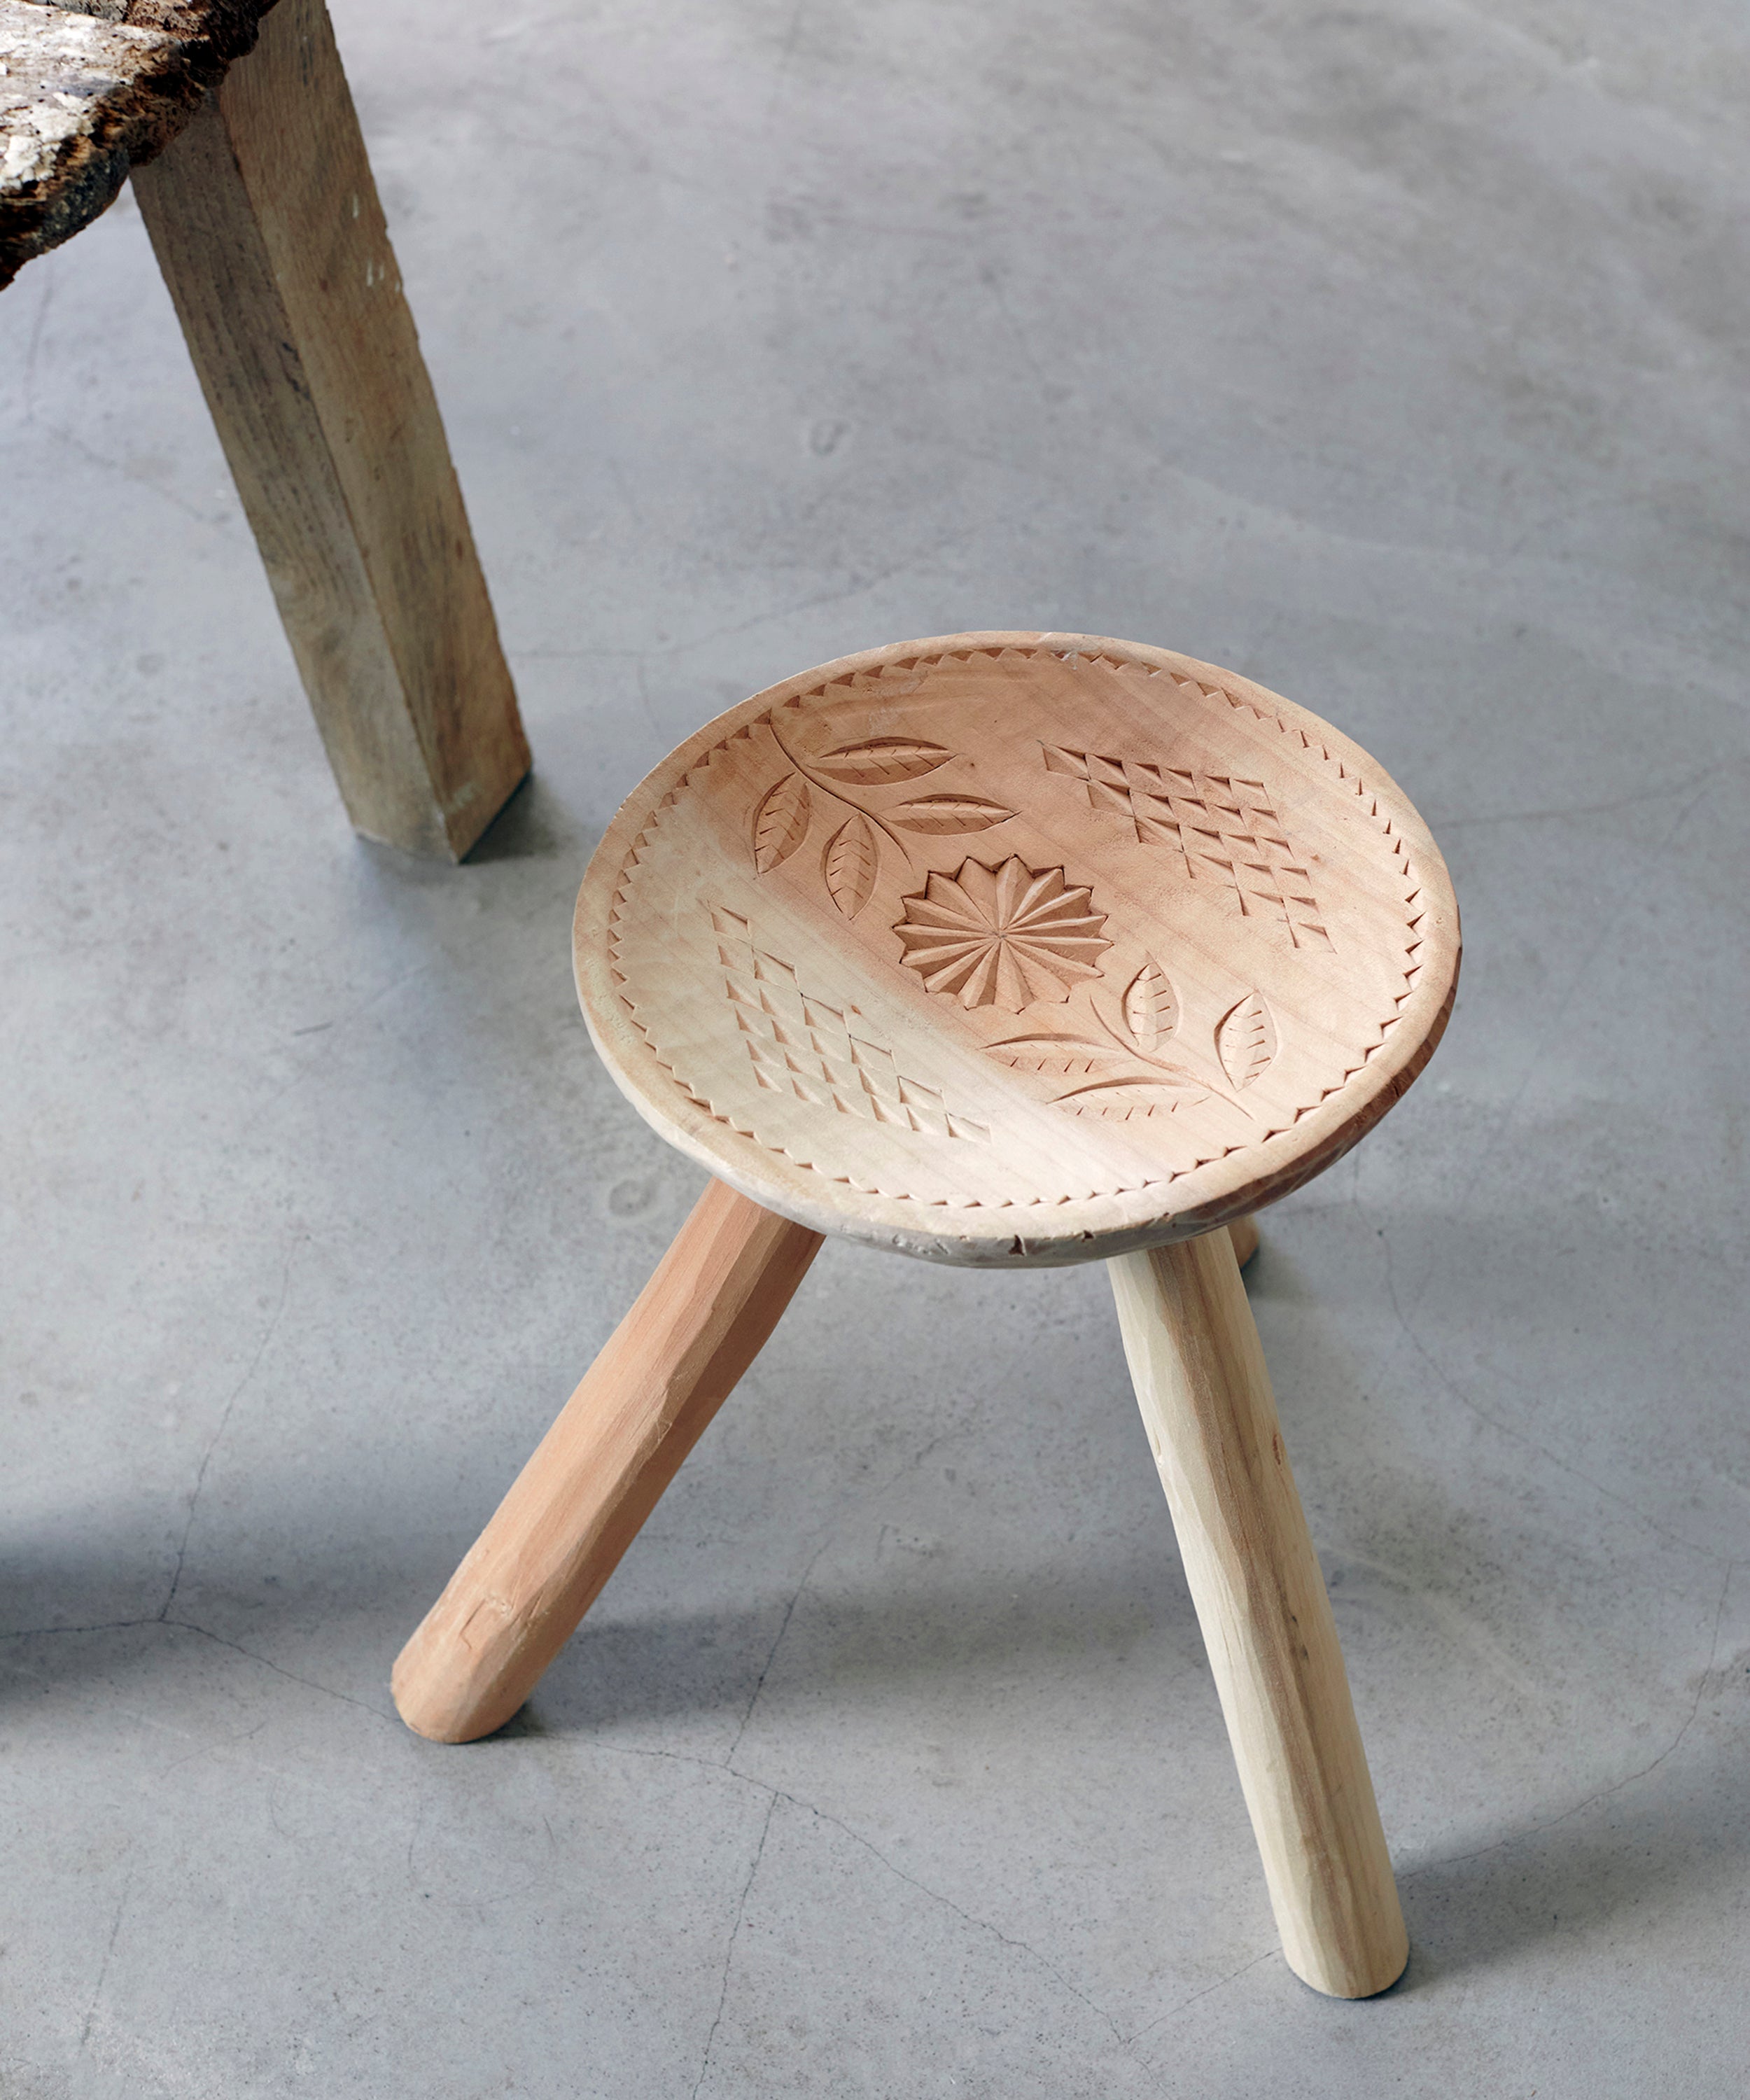 Wooden Stool with Motif